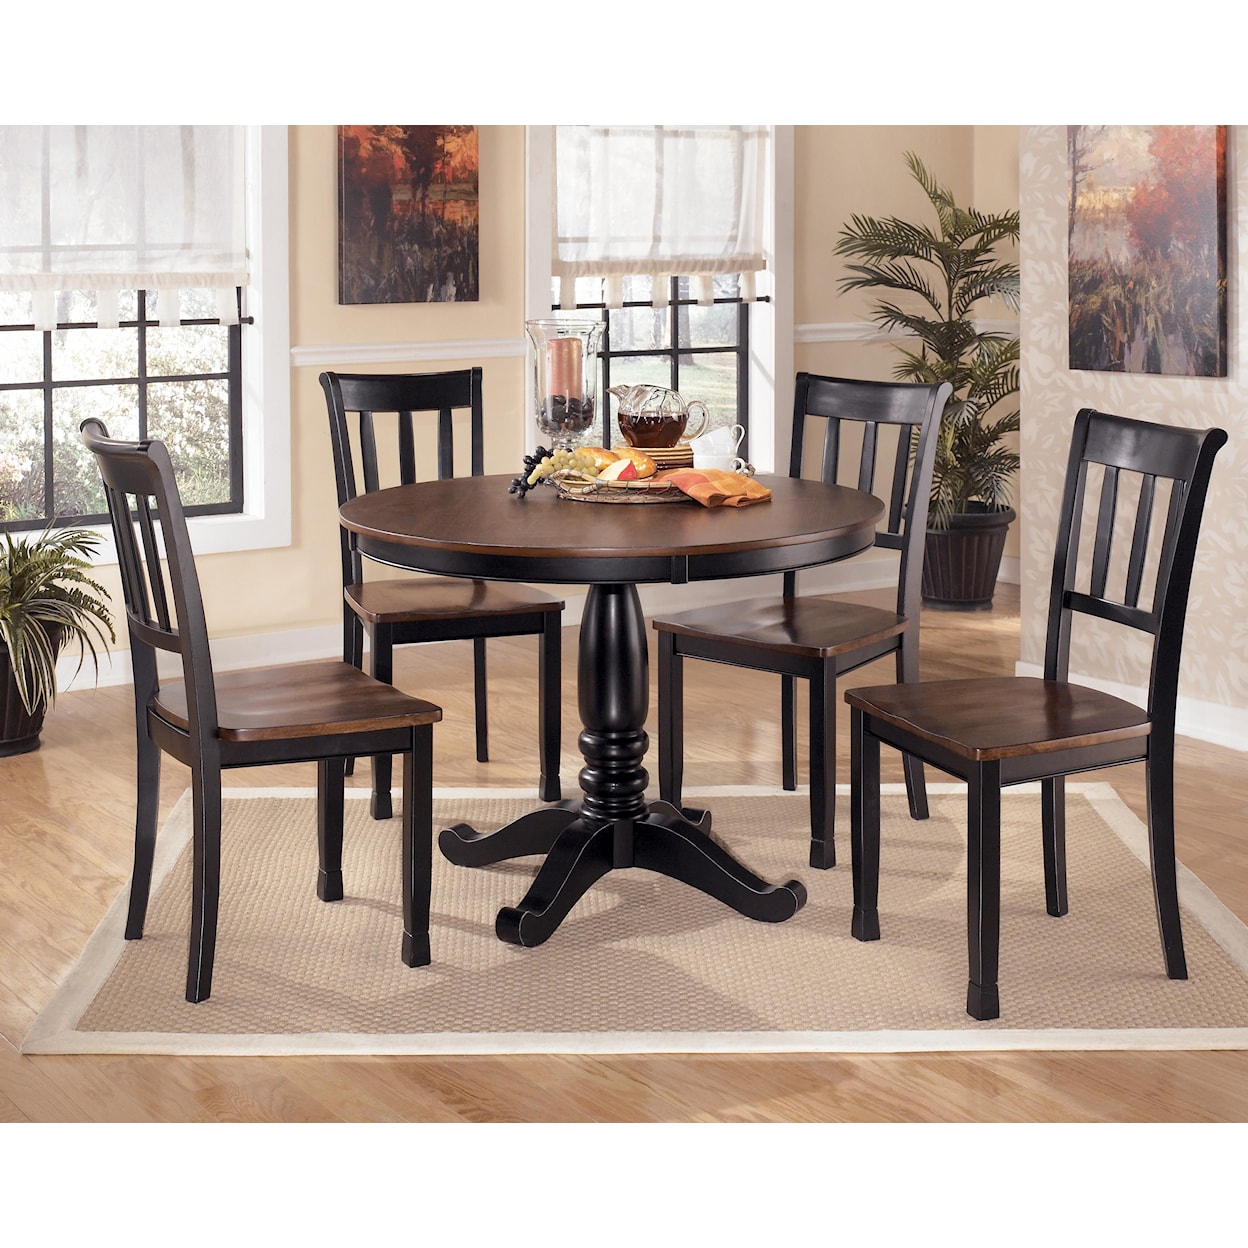 Ashley Furniture Signature Design Owingsville Dining Room Side Chair